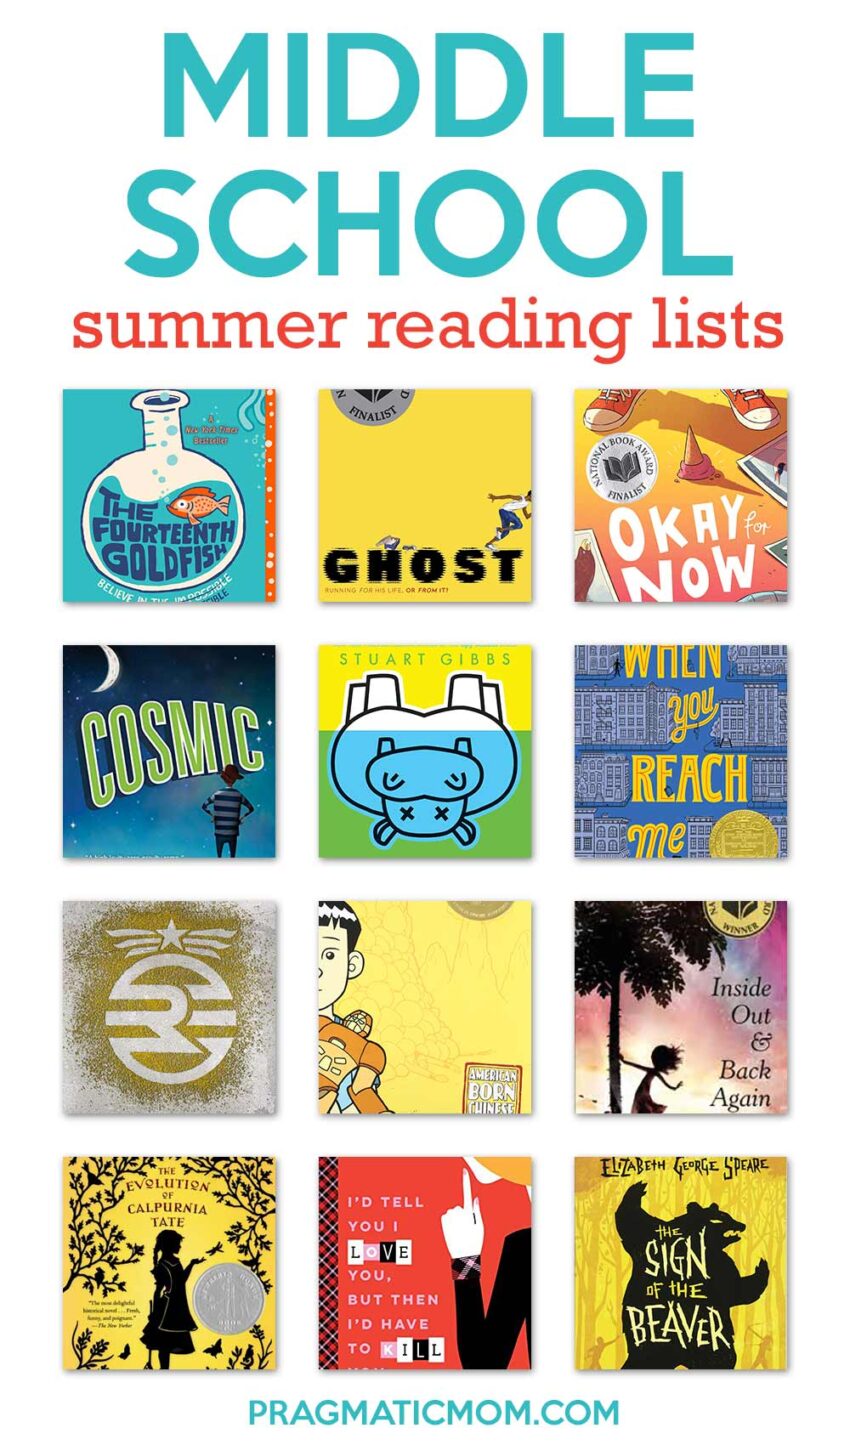 Summer Reading Lists for Middle School Kids